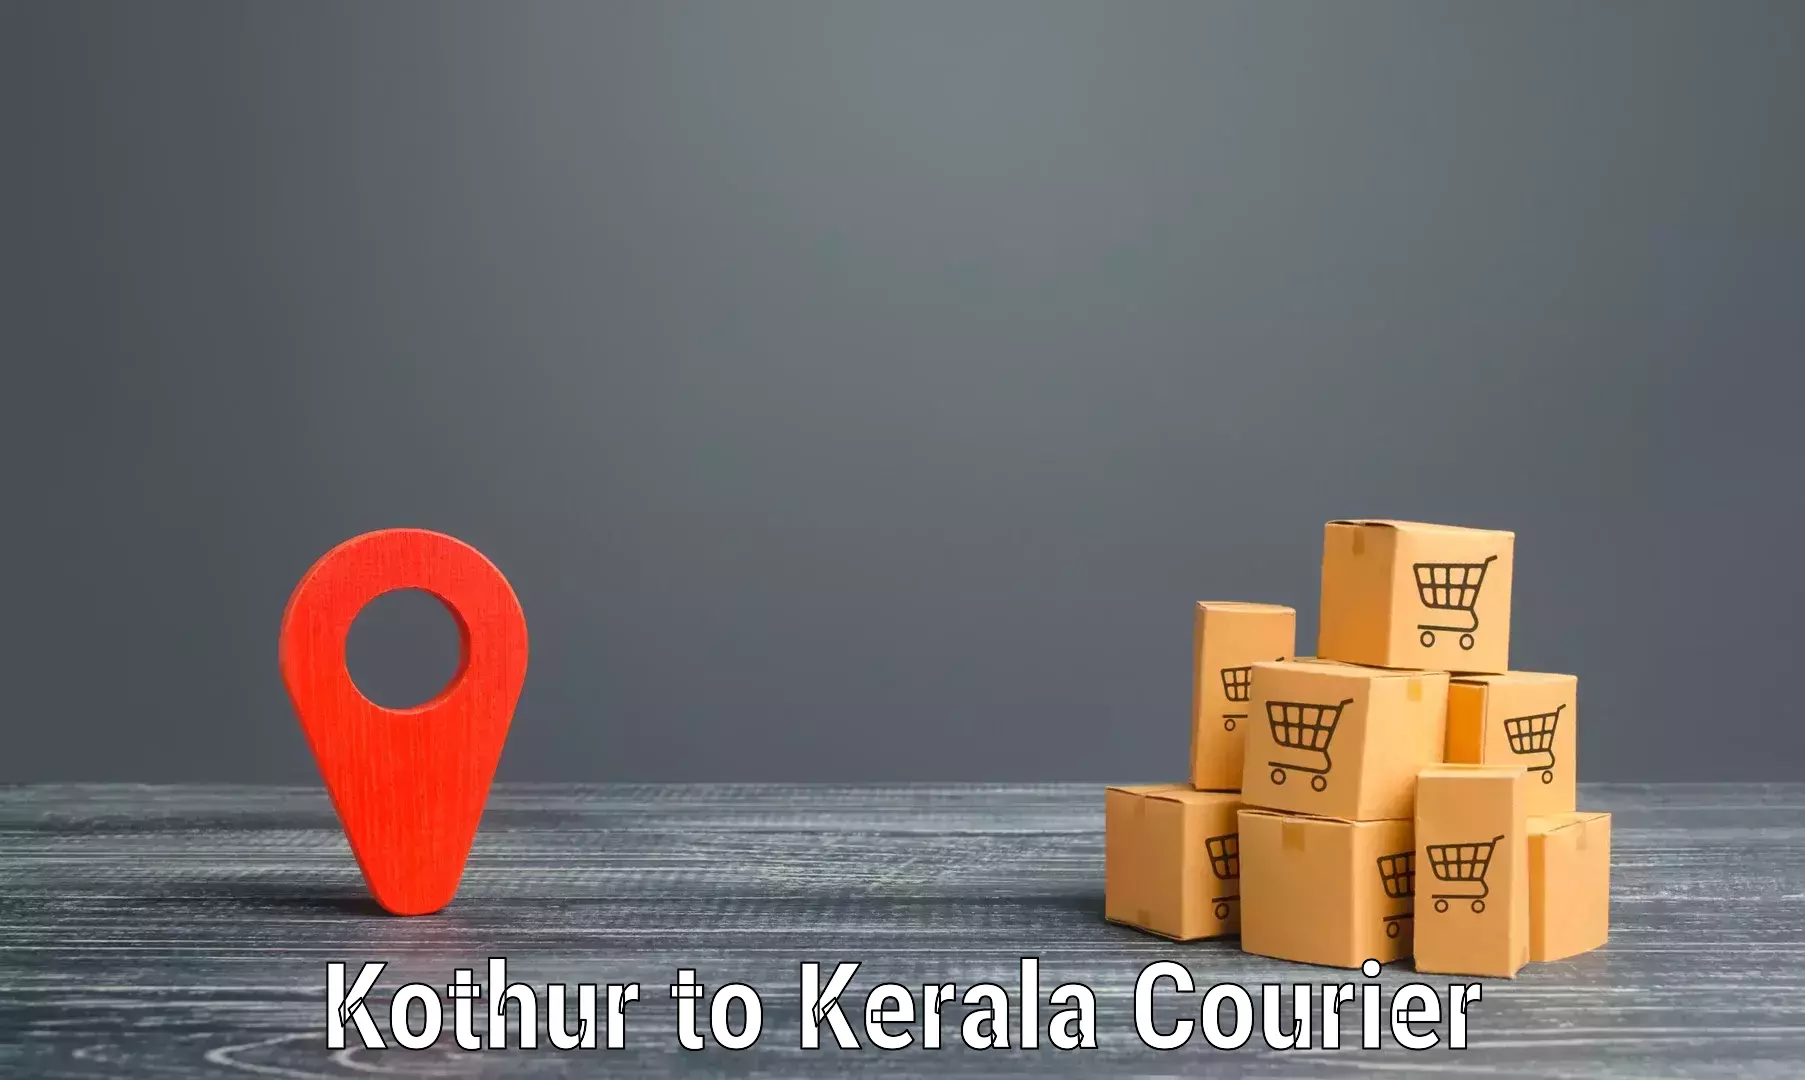 Express courier capabilities Kothur to Trivandrum